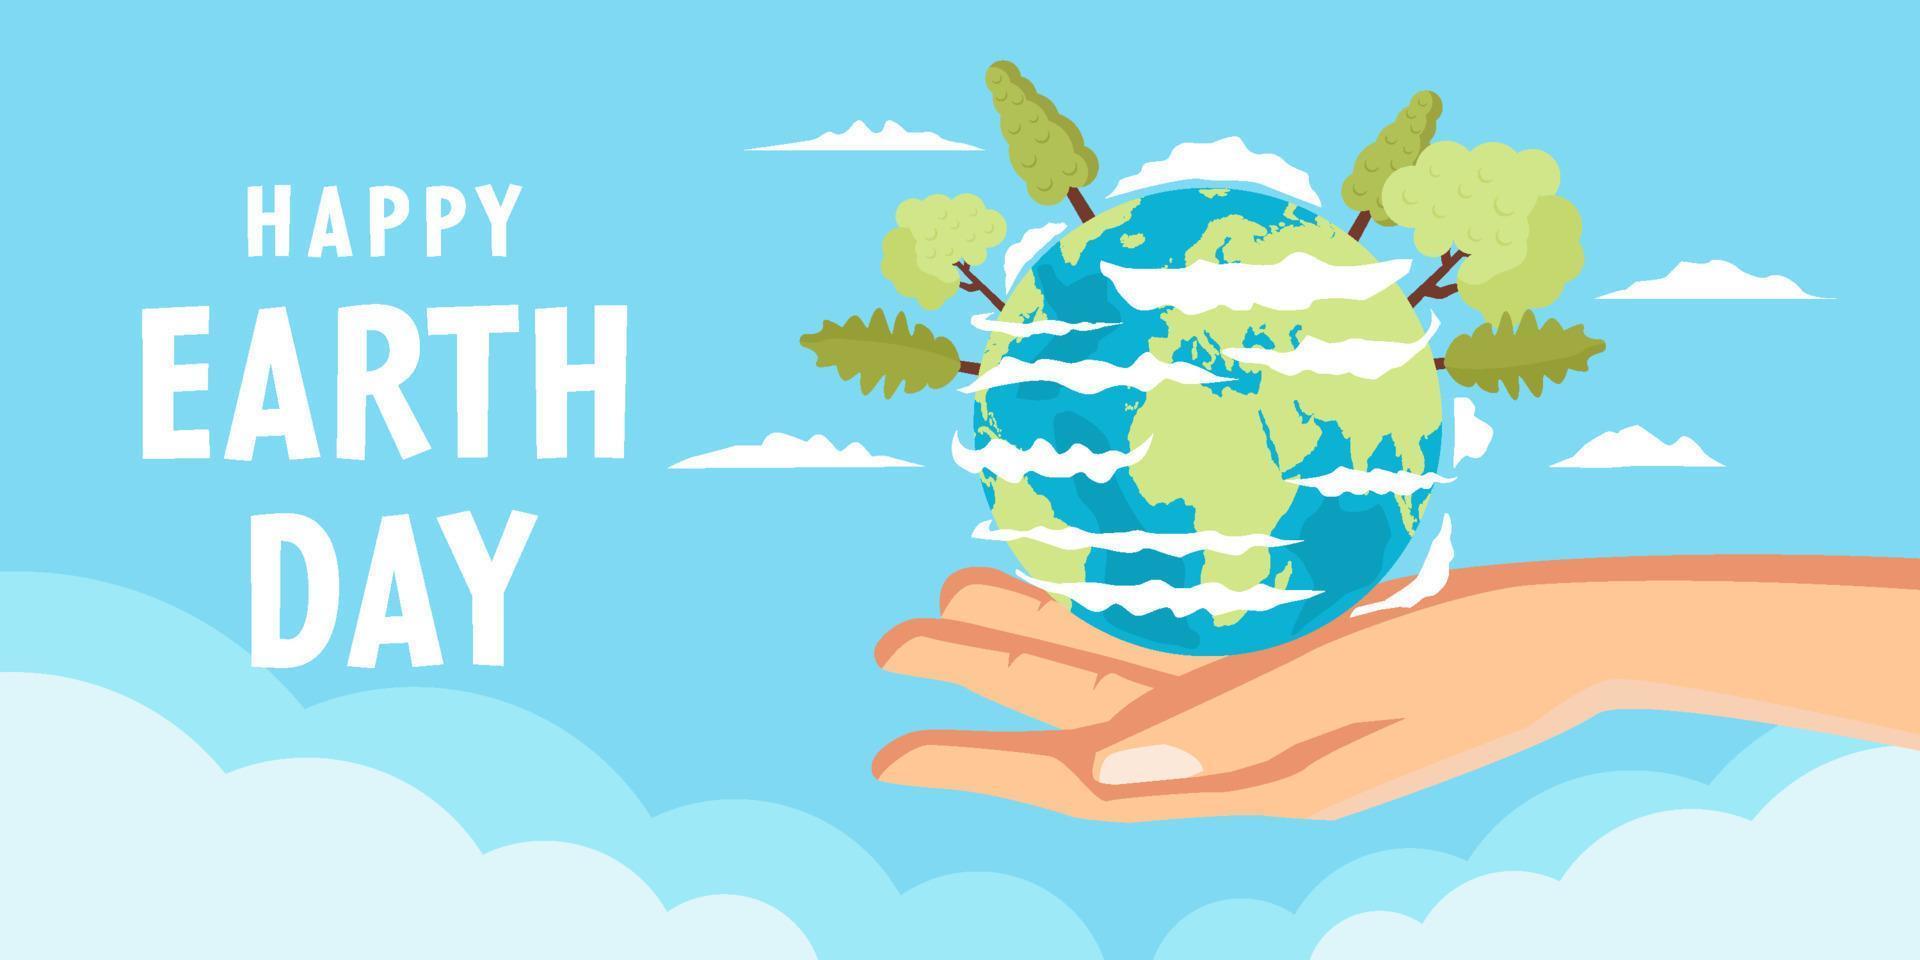 happy earth day banner illustration in flat style with hands holding earth vector